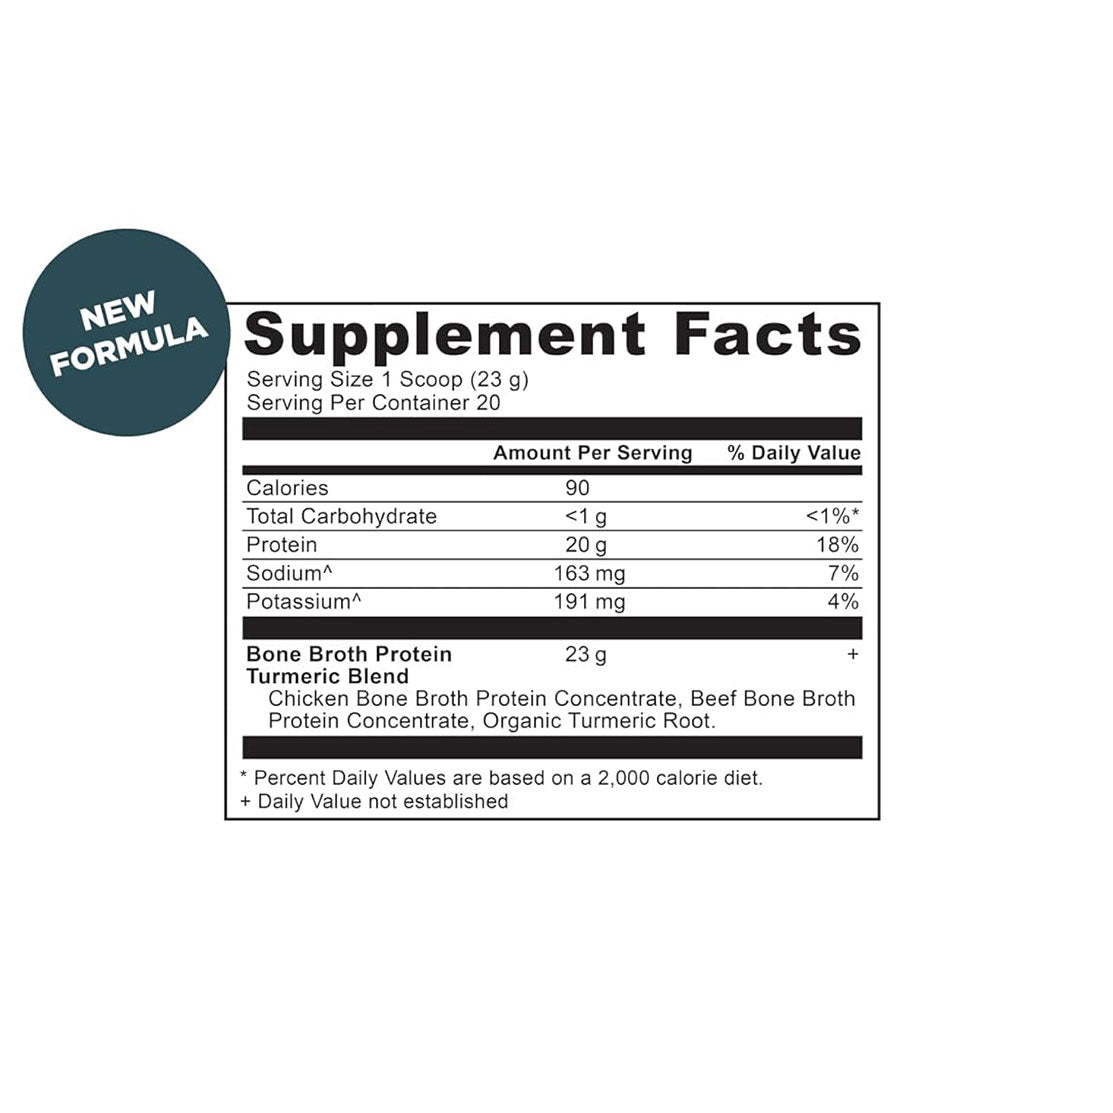 Ancient Nutrition Bone Broth Protein (Turmeric) supplement facts